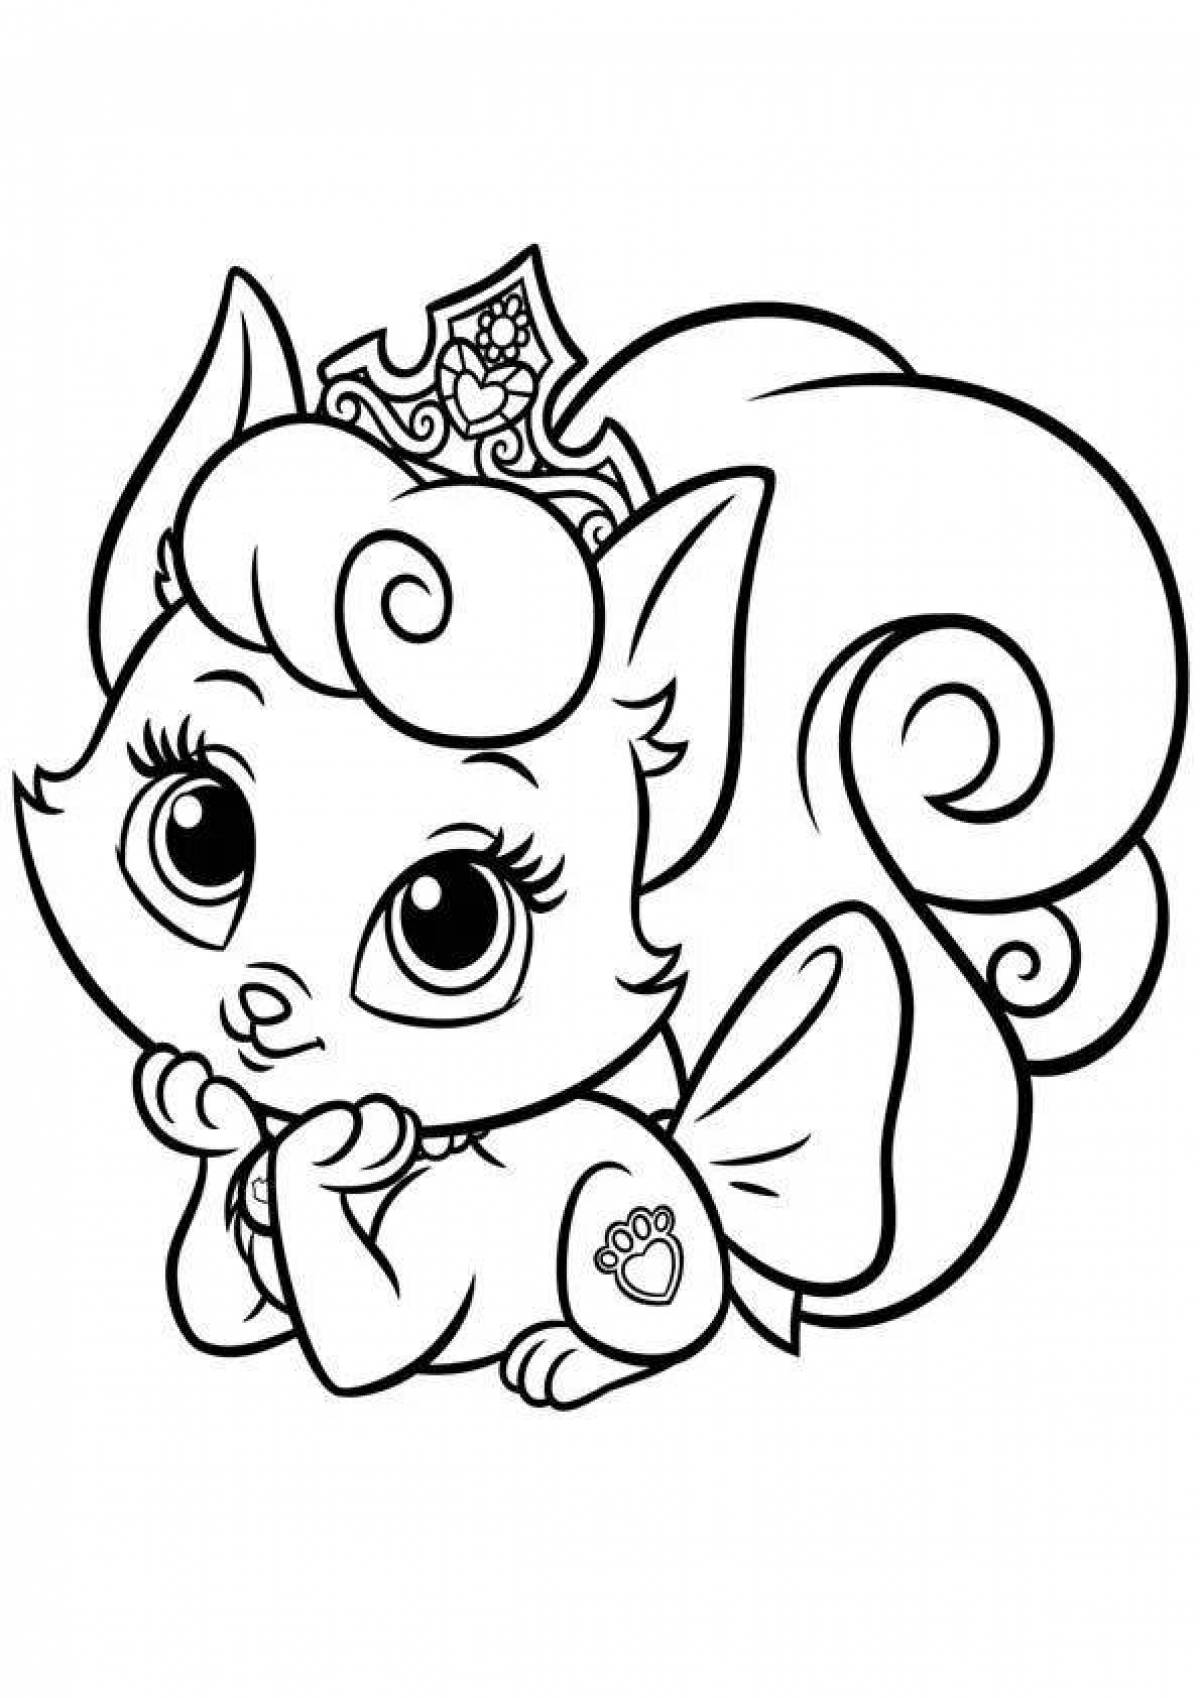 Playtime coloring page kitty unicorn